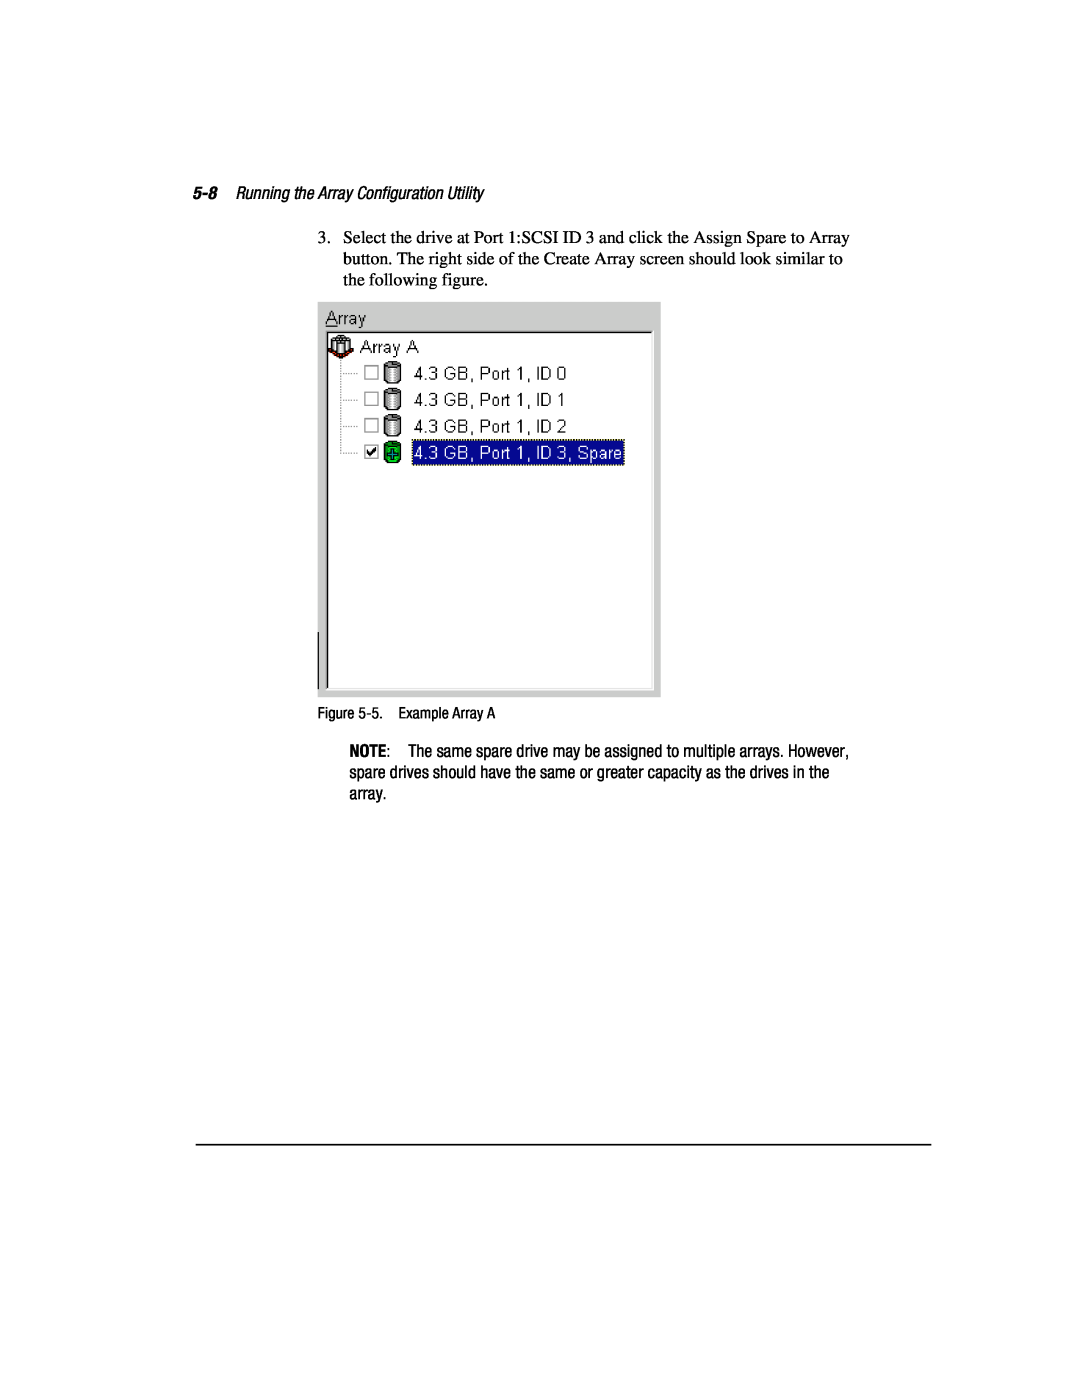 Compaq 3200 manual Running the Array Configuration Utility, 5. Example Array A 